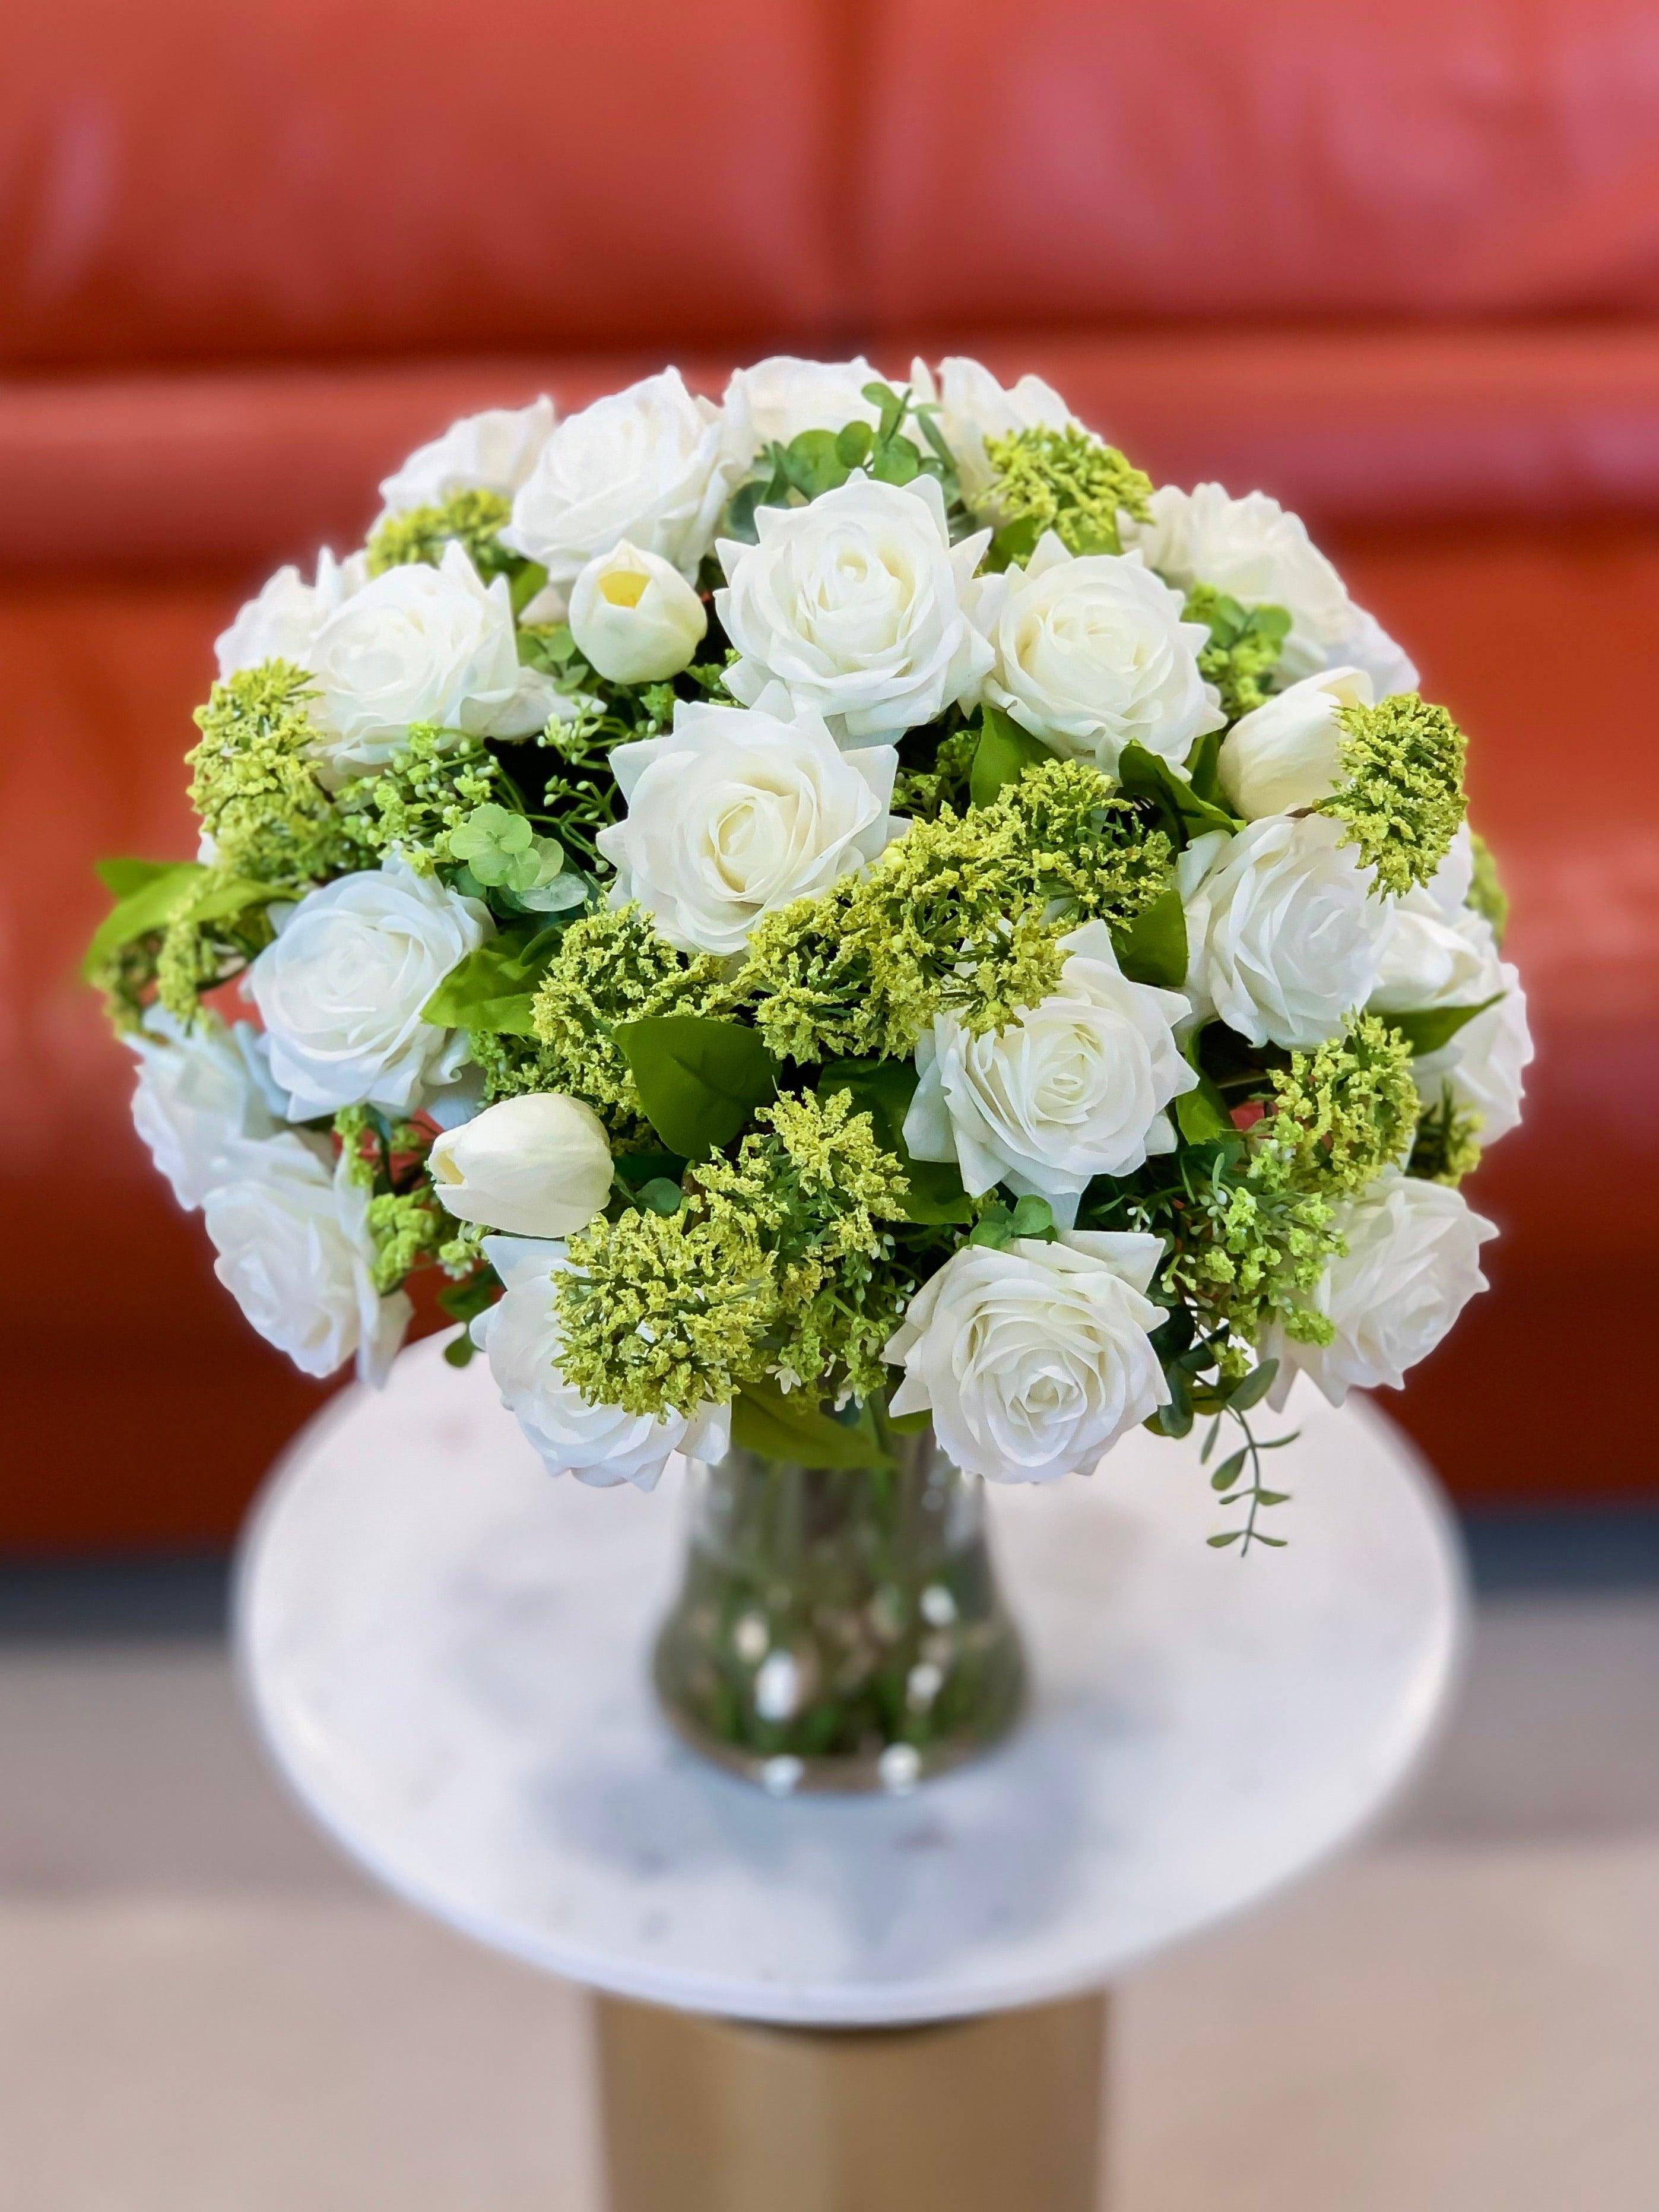 Large White Rose Real Touch Centerpiece - Flovery